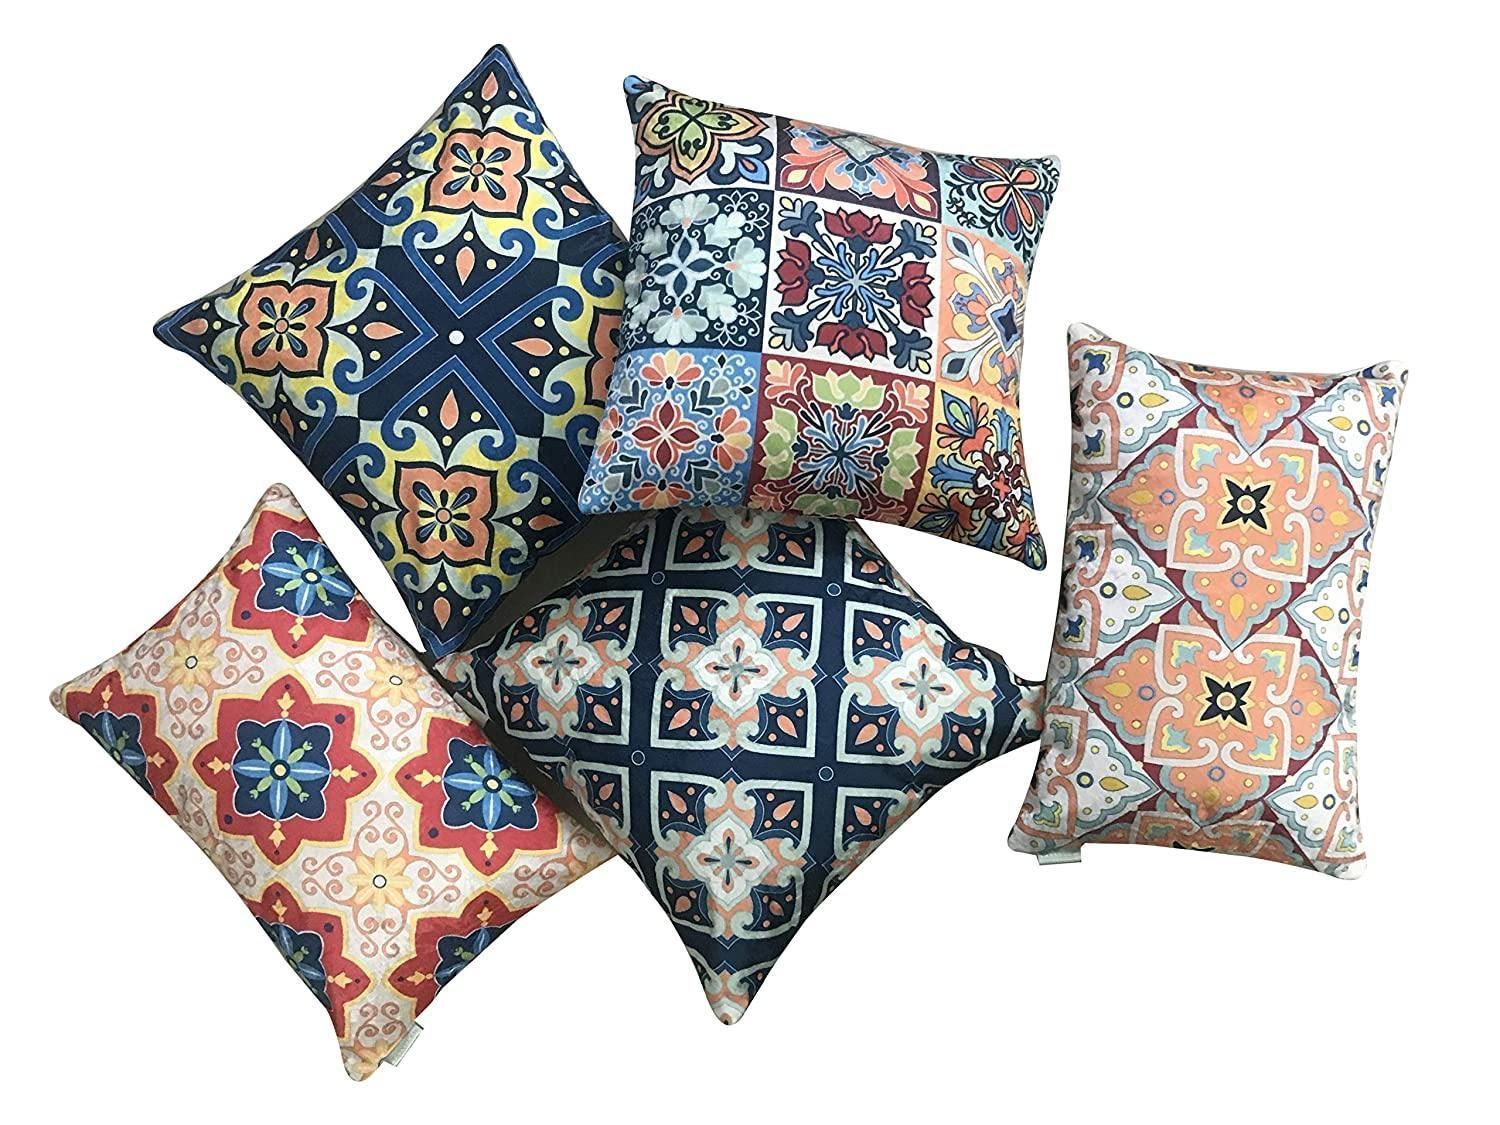 Moroccan 5 Velvet Cushion Cover Set (Blue, Red and White, 3-16 x 16 Inch, 2-18 x12 Inch)